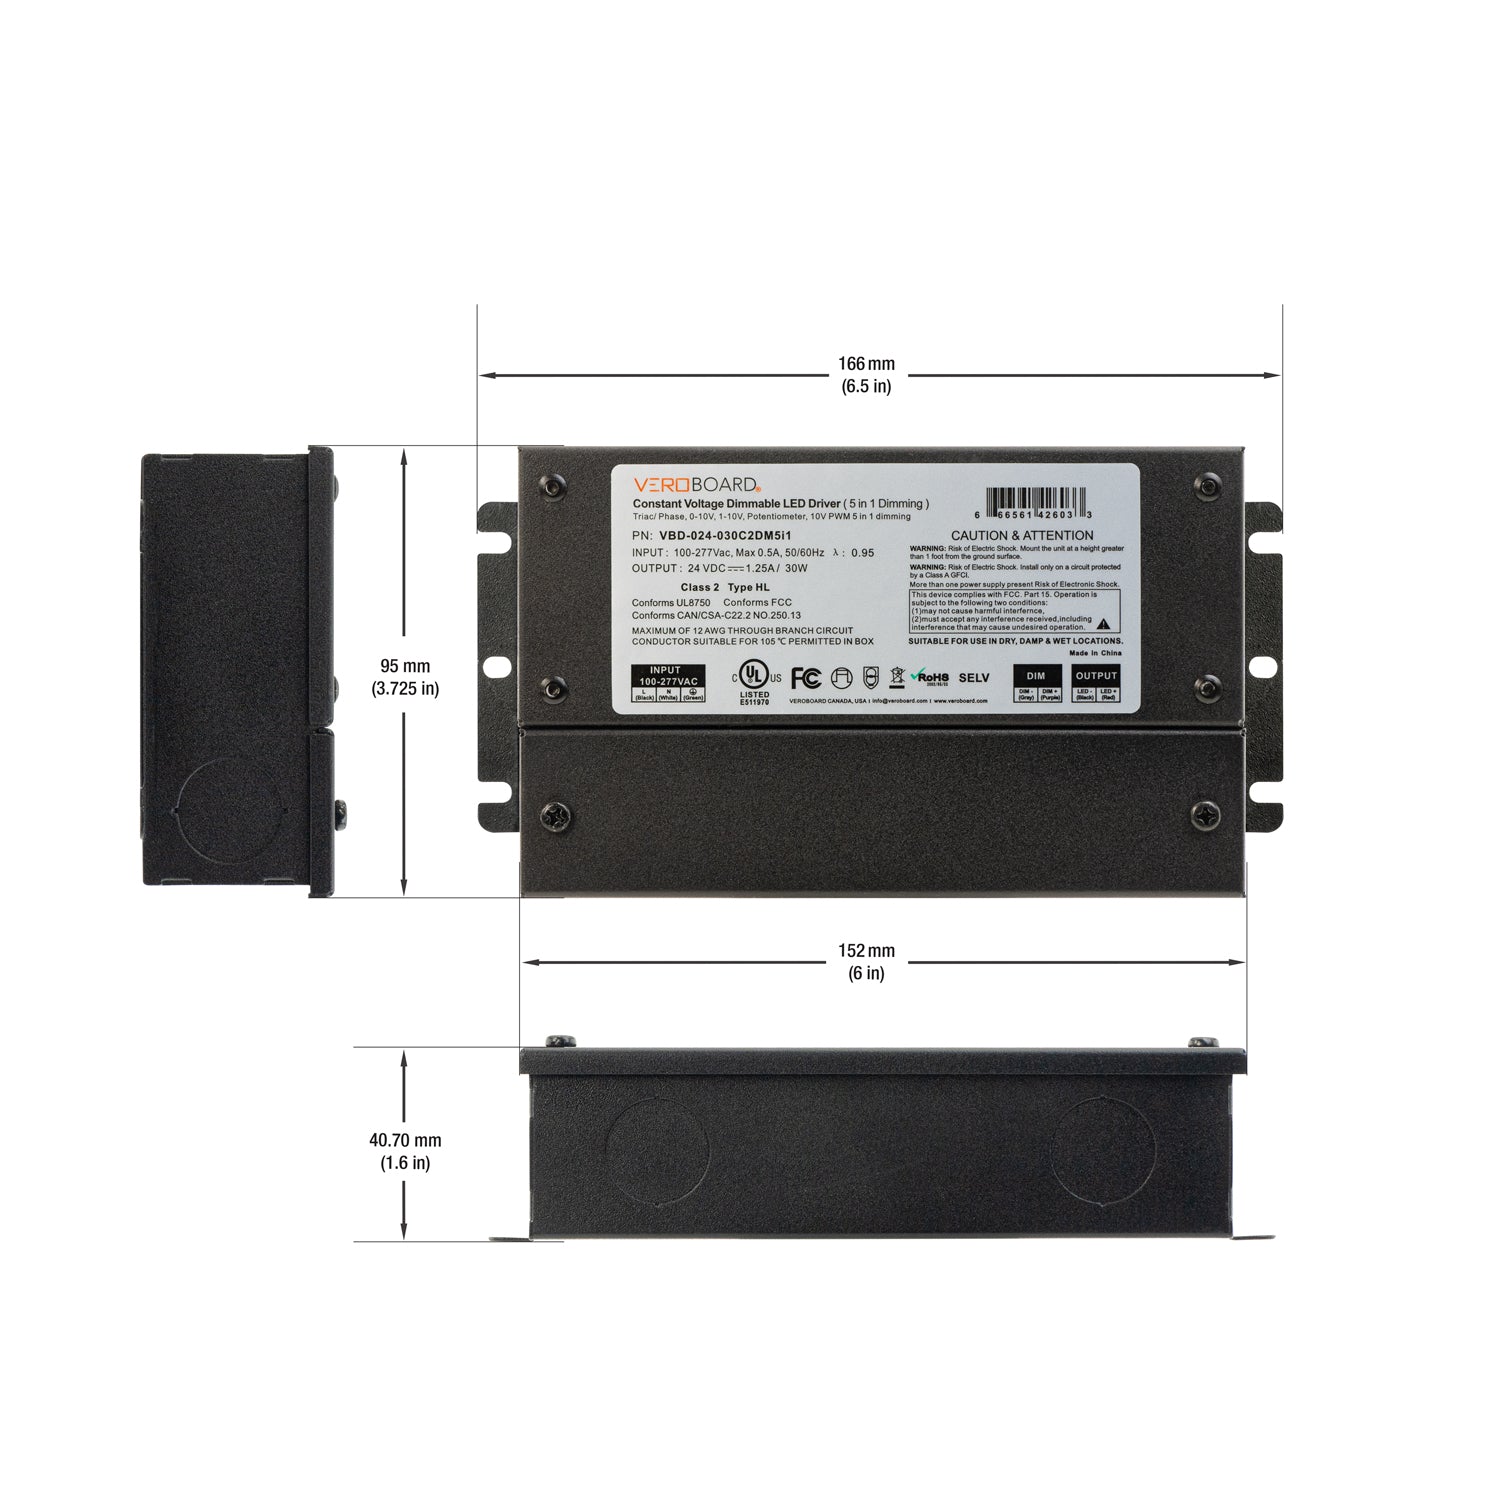 VBD-024-030C2DM5i1 Constant Voltage Dimmable Driver (5 in 1), Veroboard